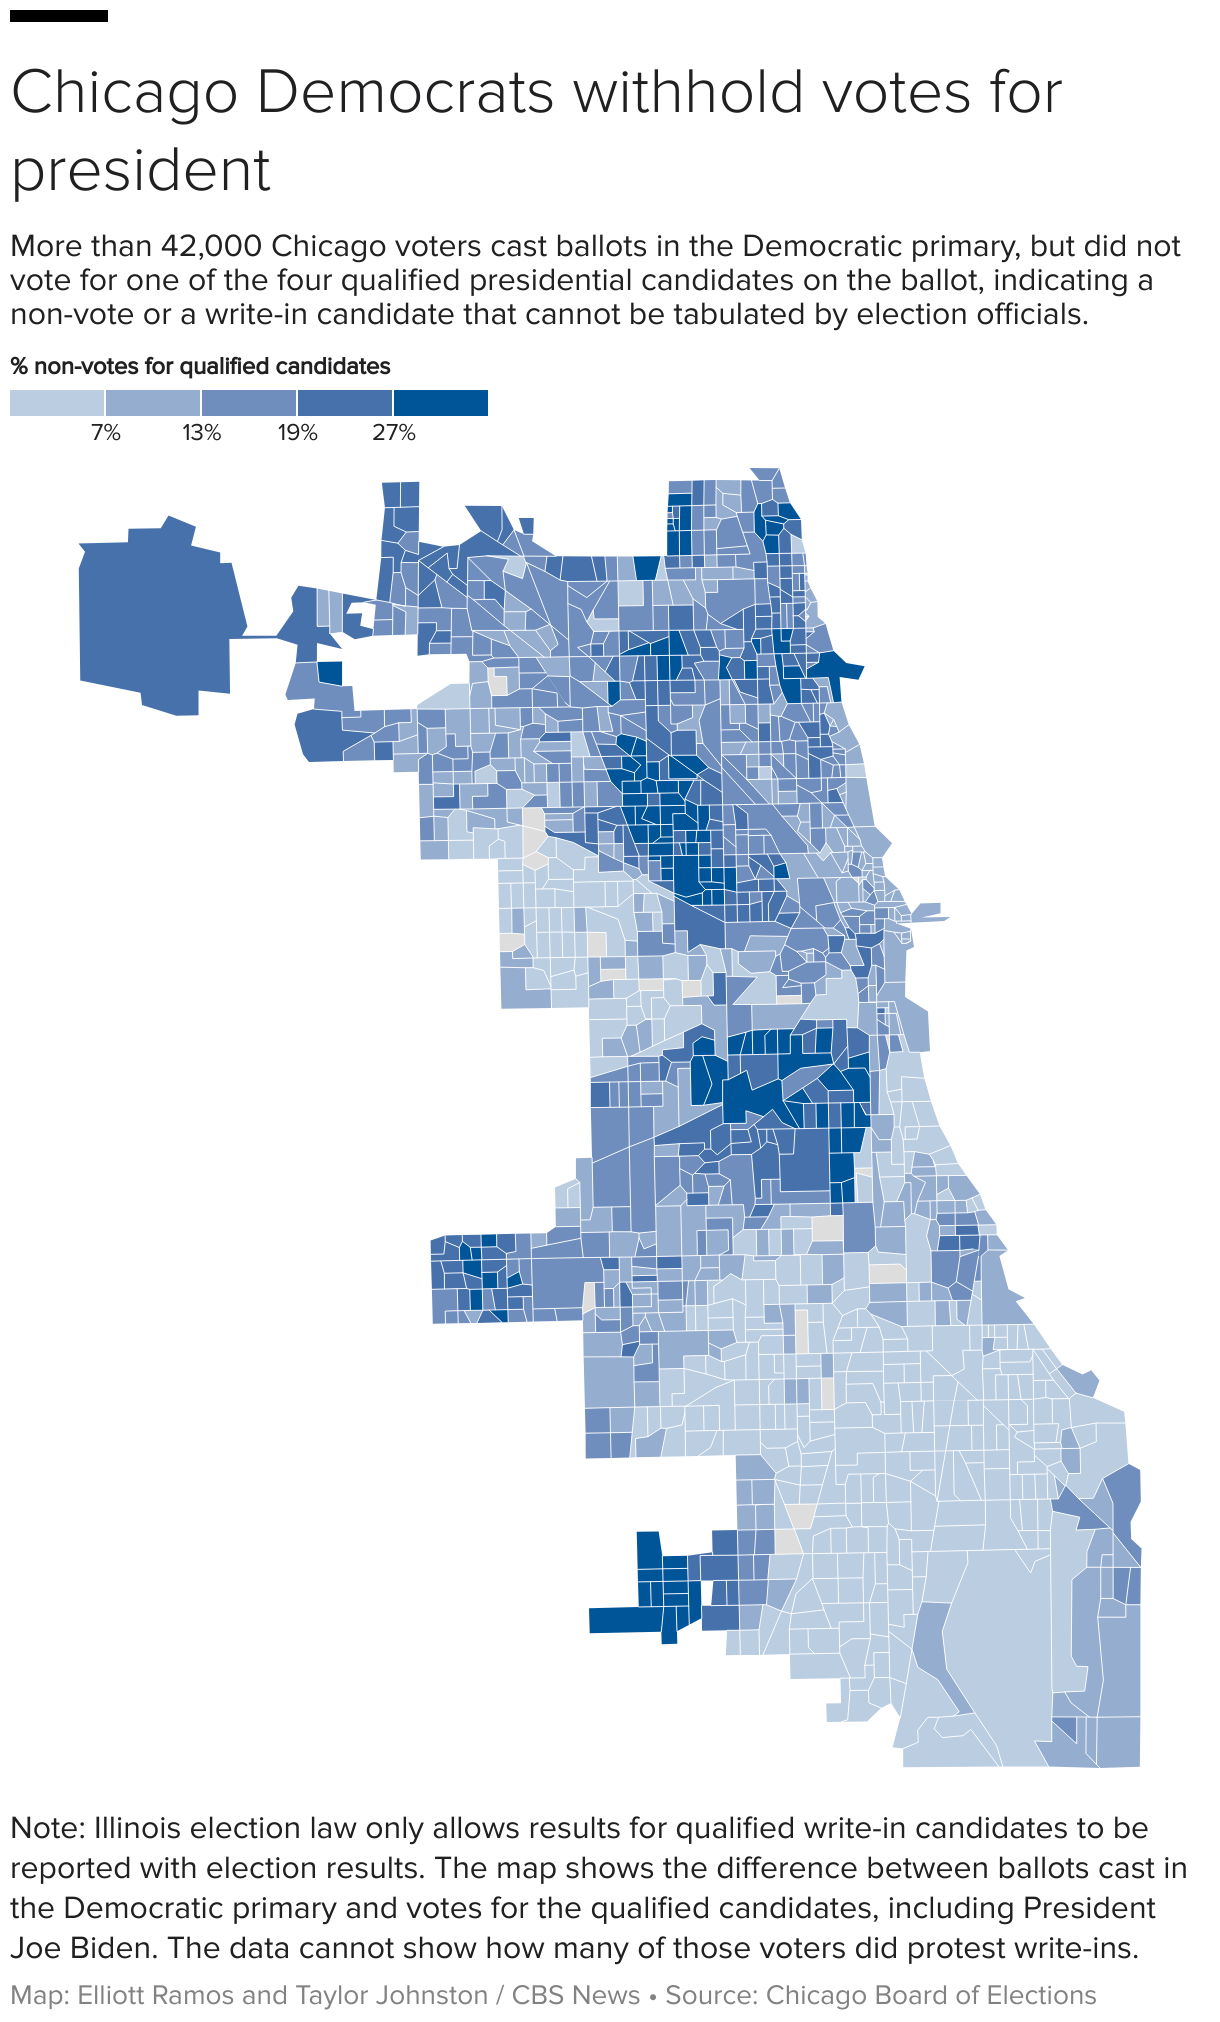 Chicago precinct map illustrating the percent of non-votes for qualified presidential candidates.